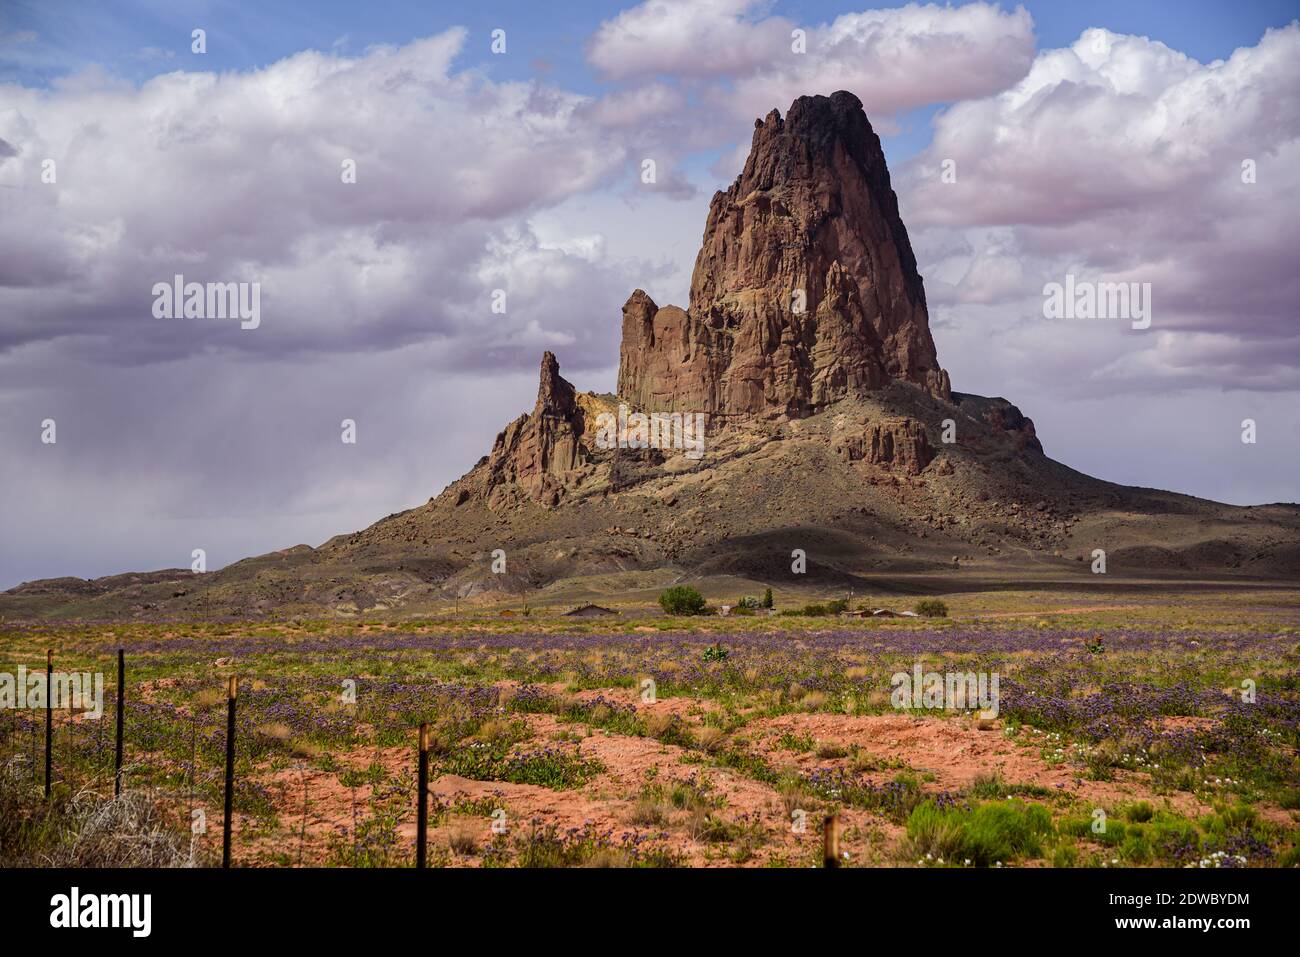 One of the first monuments seen in Monument Valley. The composition has balance with the fence in the foreground.  Awesome directional lighting Stock Photo